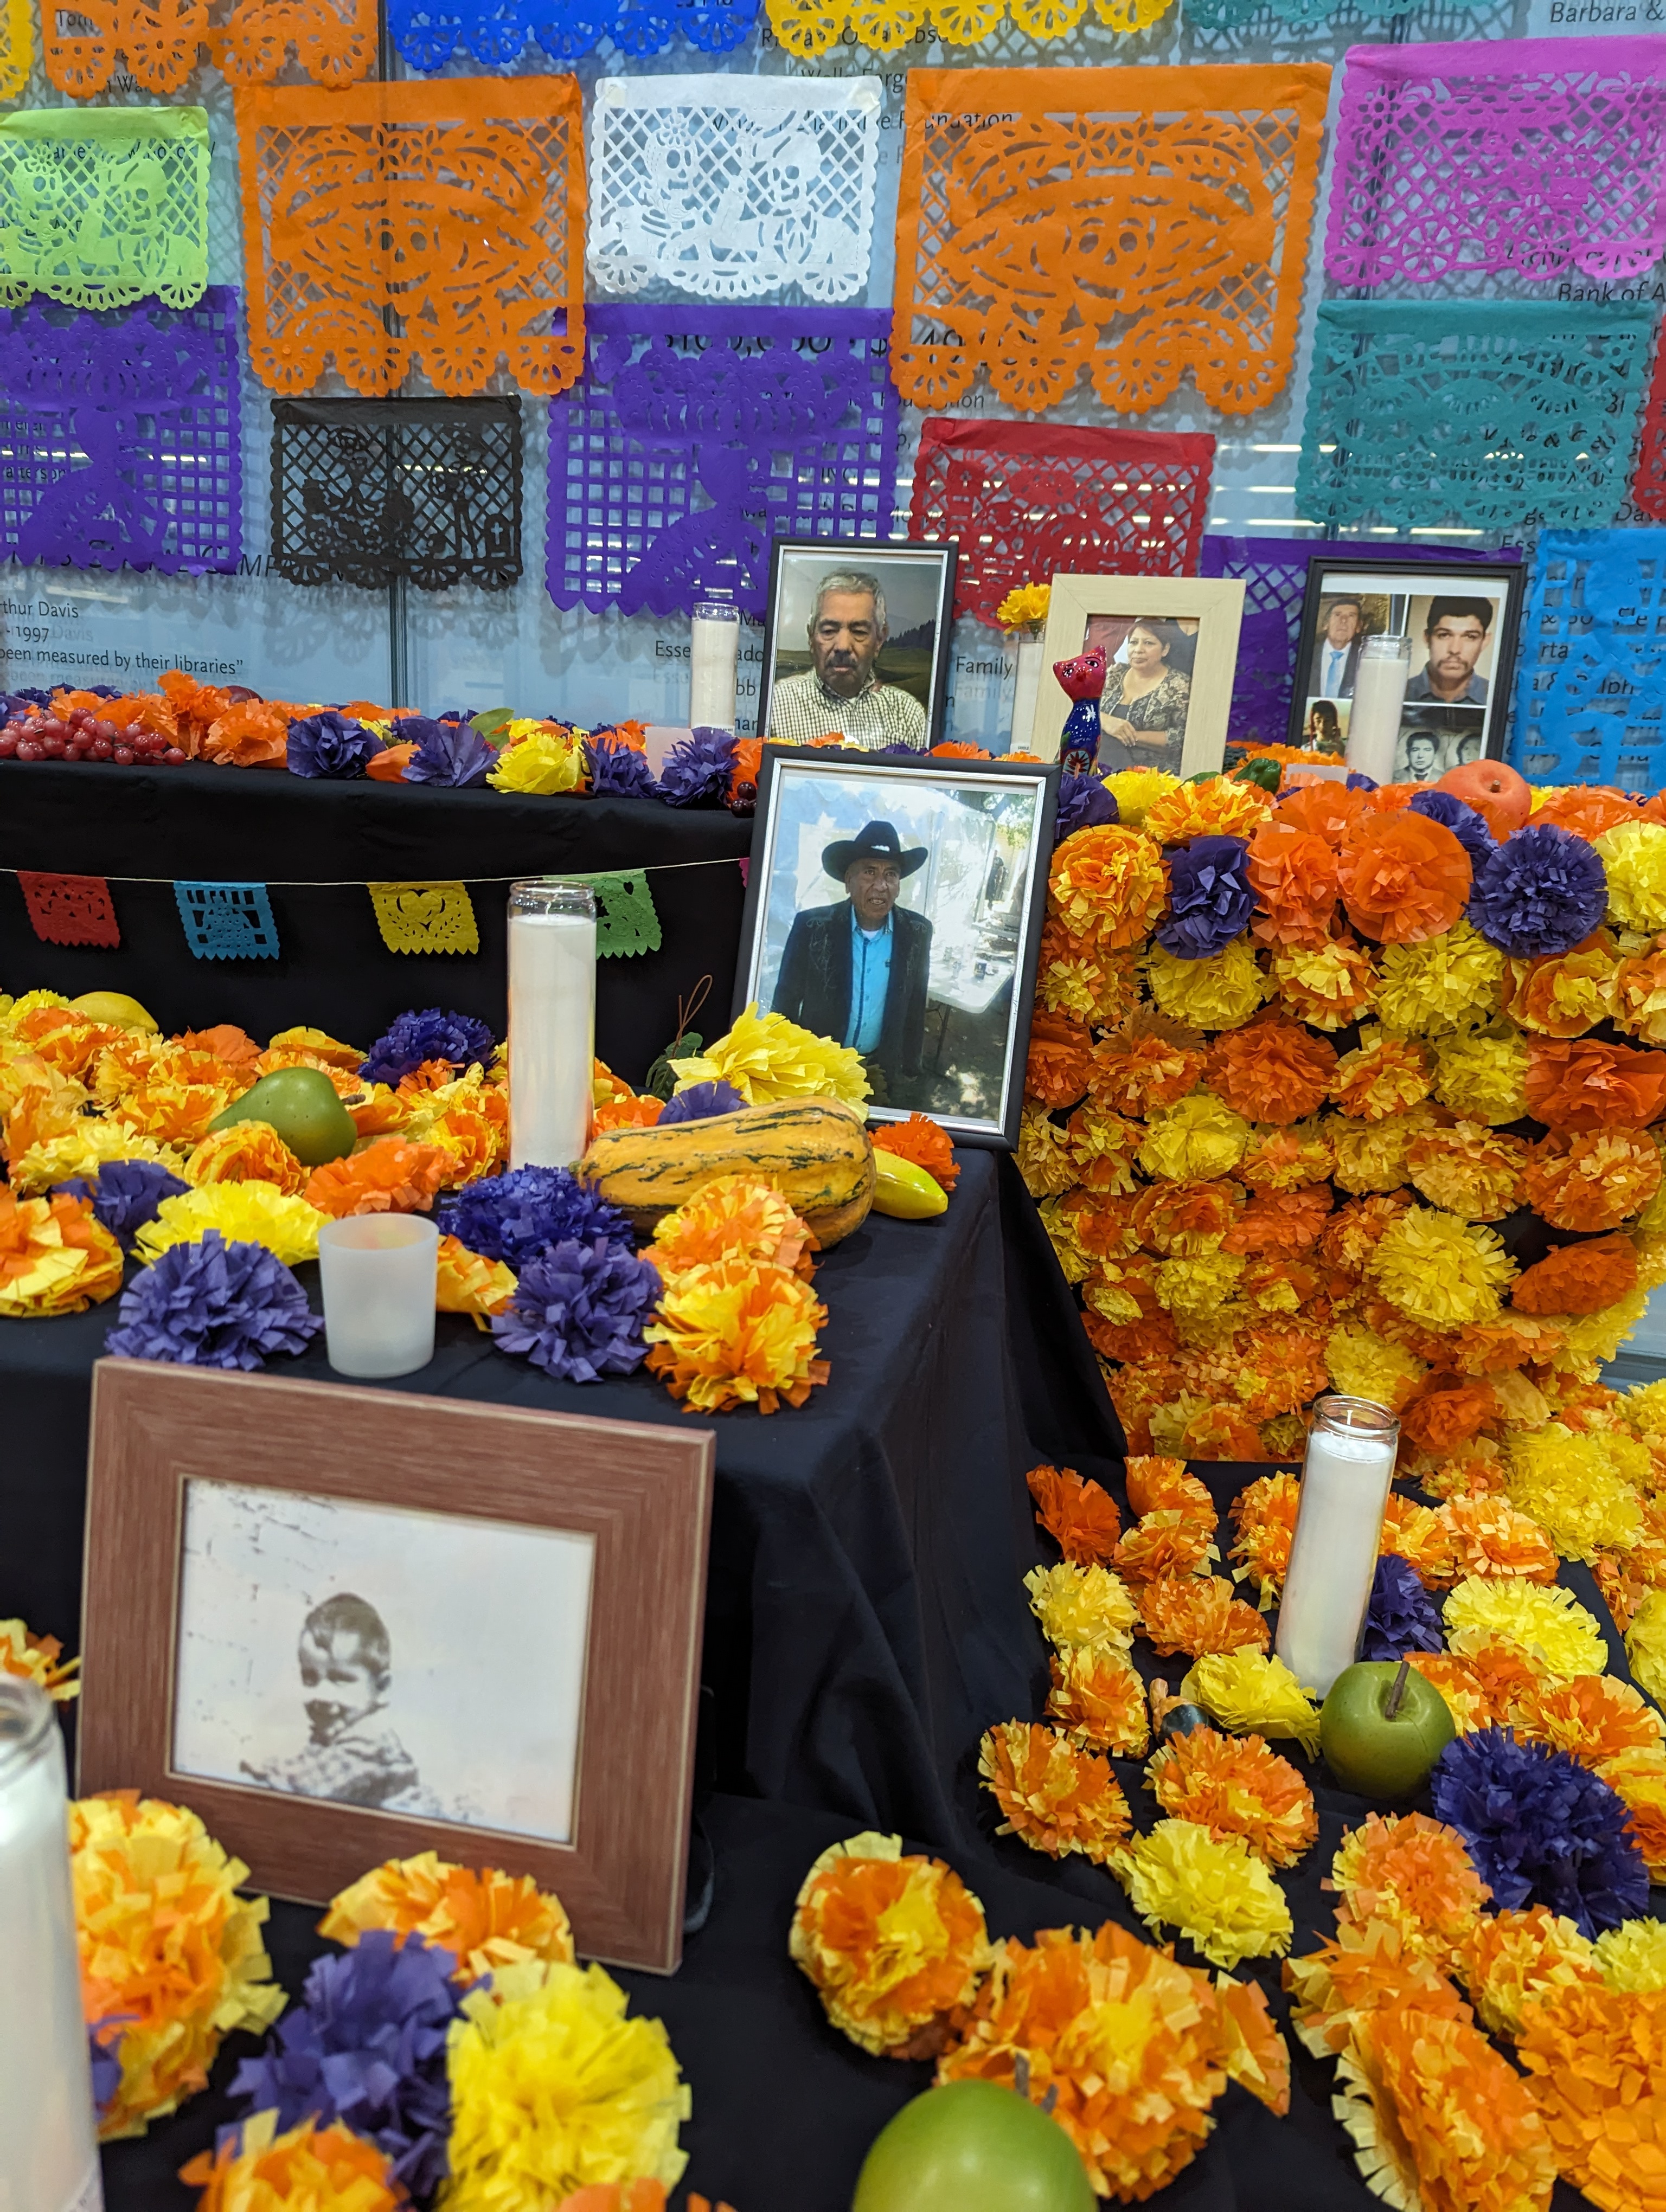 Ofrenda with paper marigolds, cut paper, photographs, candles, and food